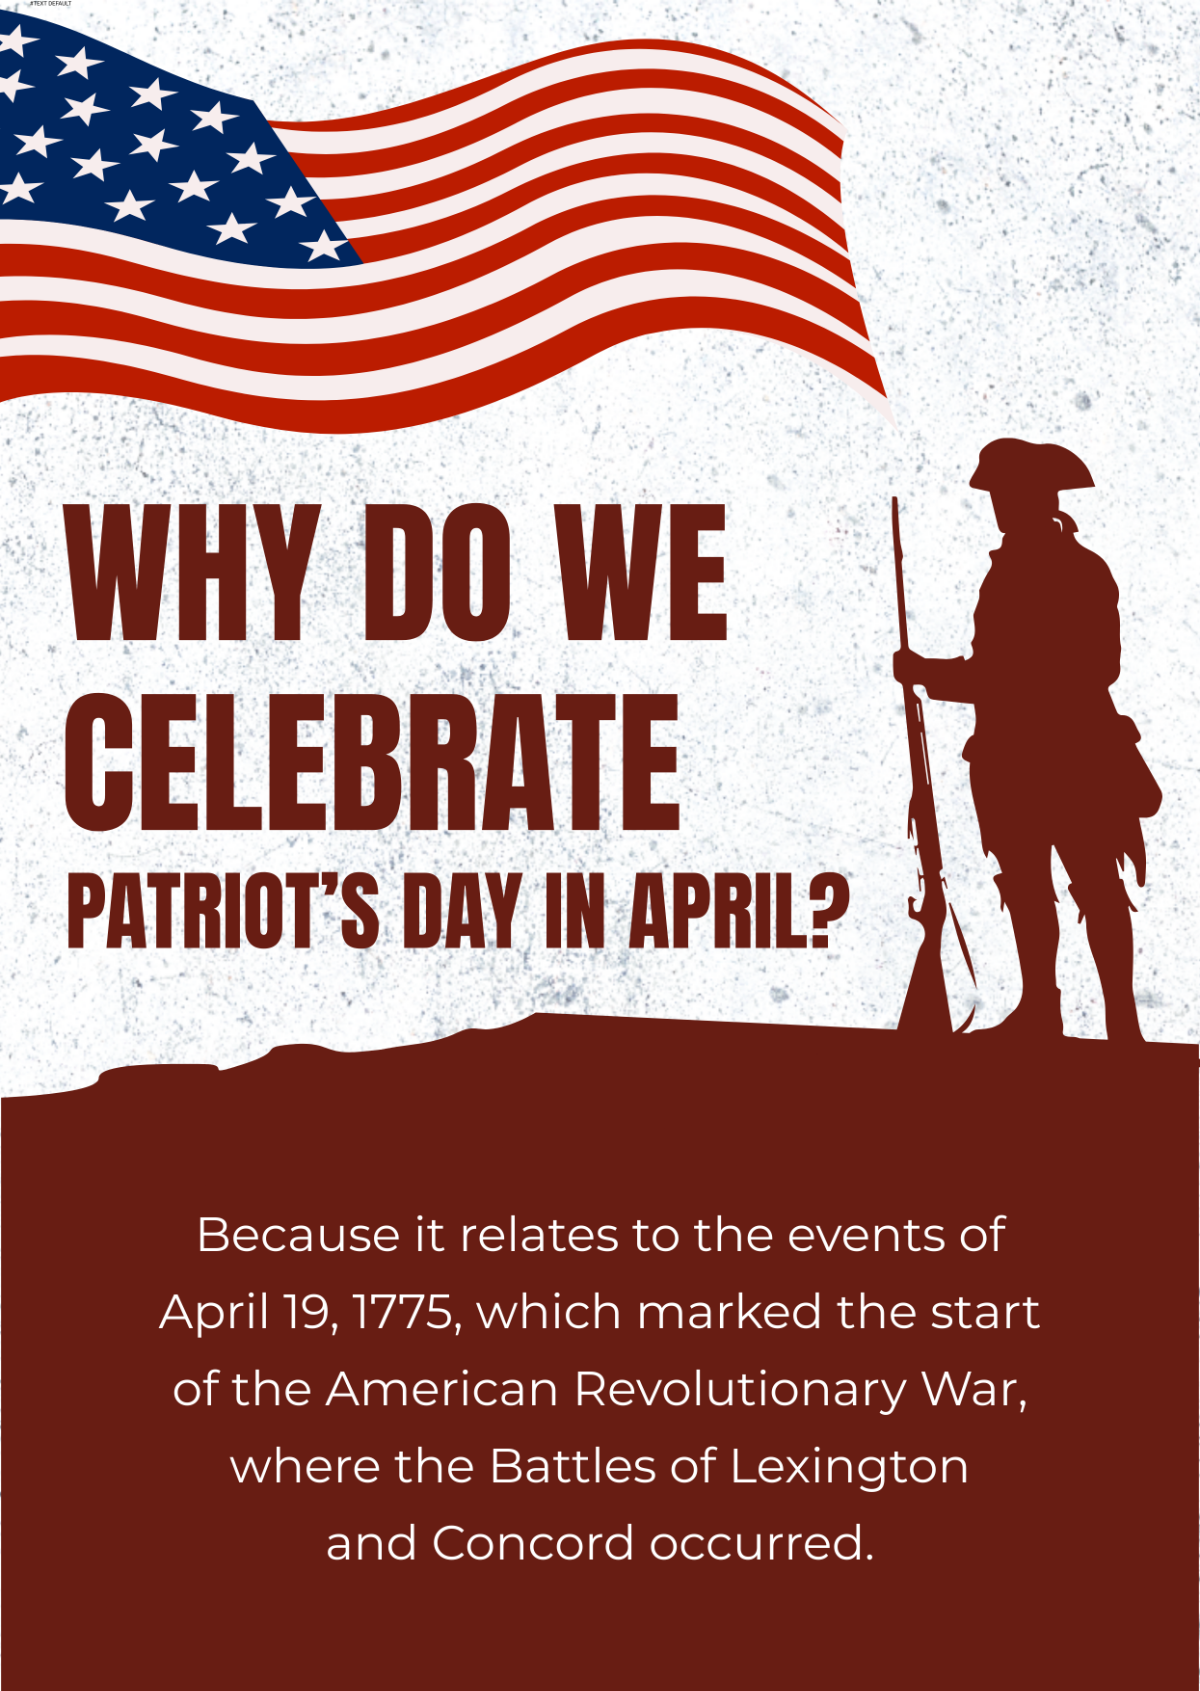 Why do we celebrate Patriot's Day in April? Template